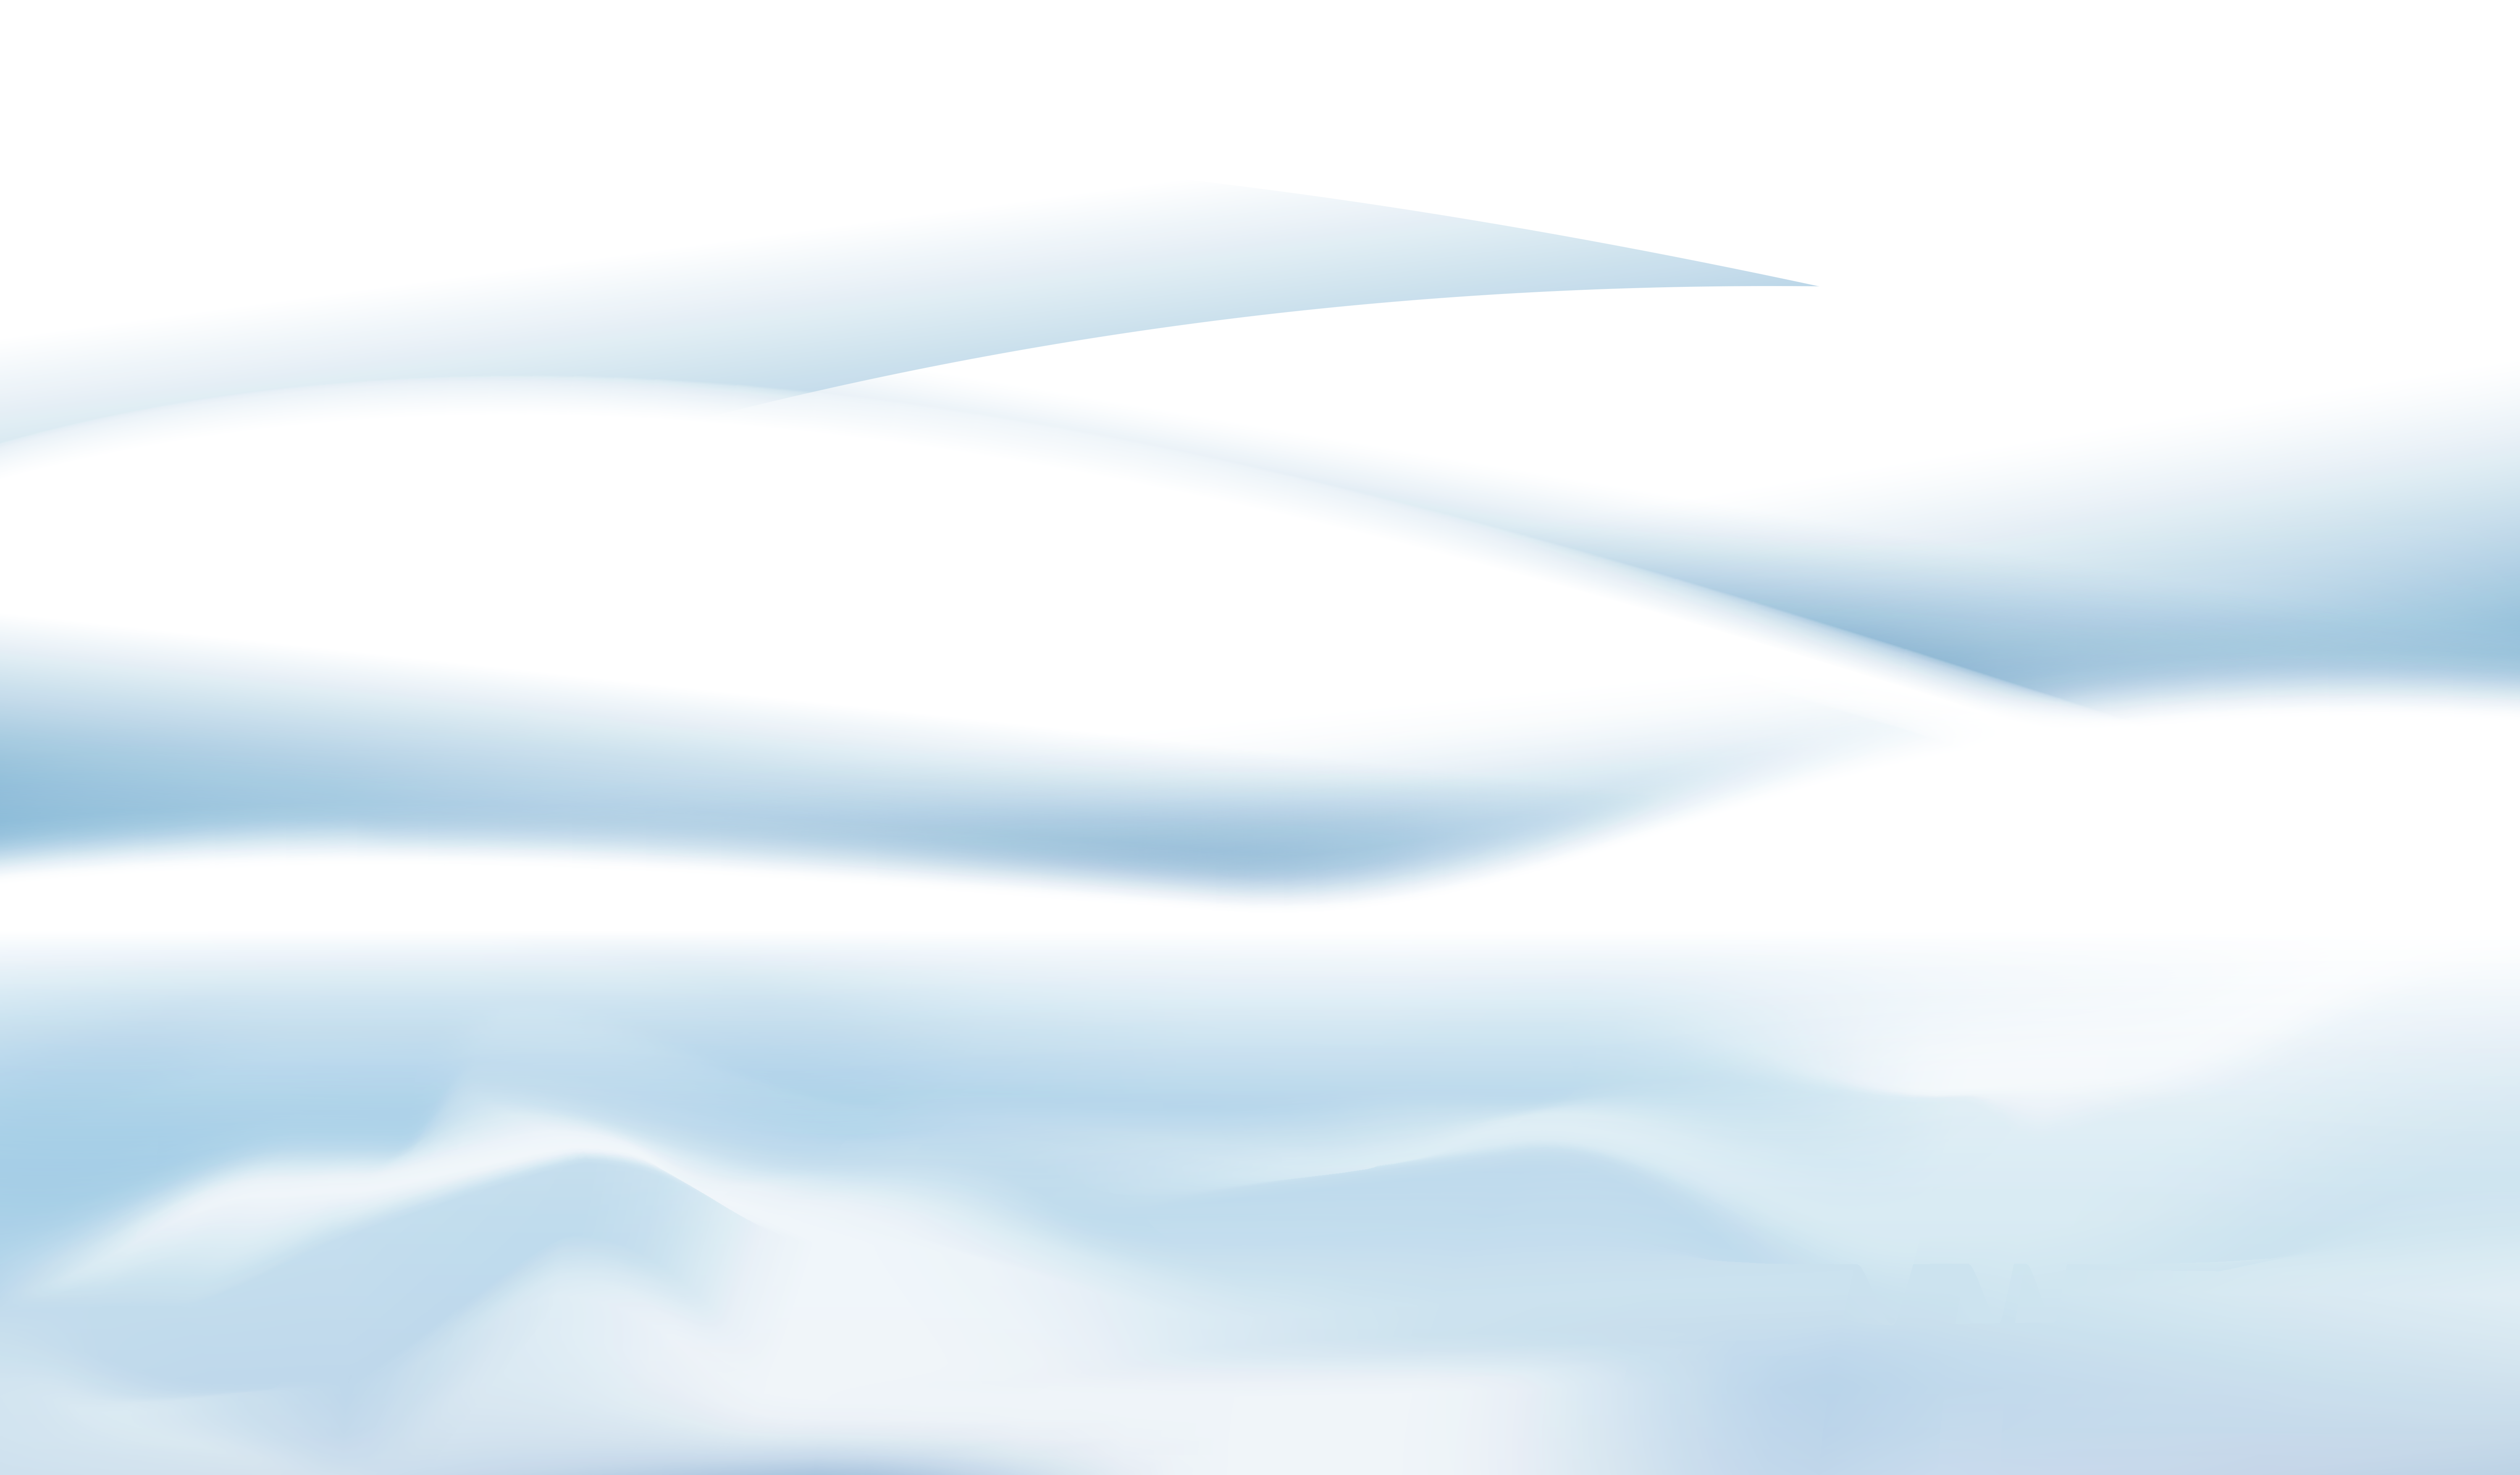 Png image gallery yopriceville. Blizzard clipart snow ground